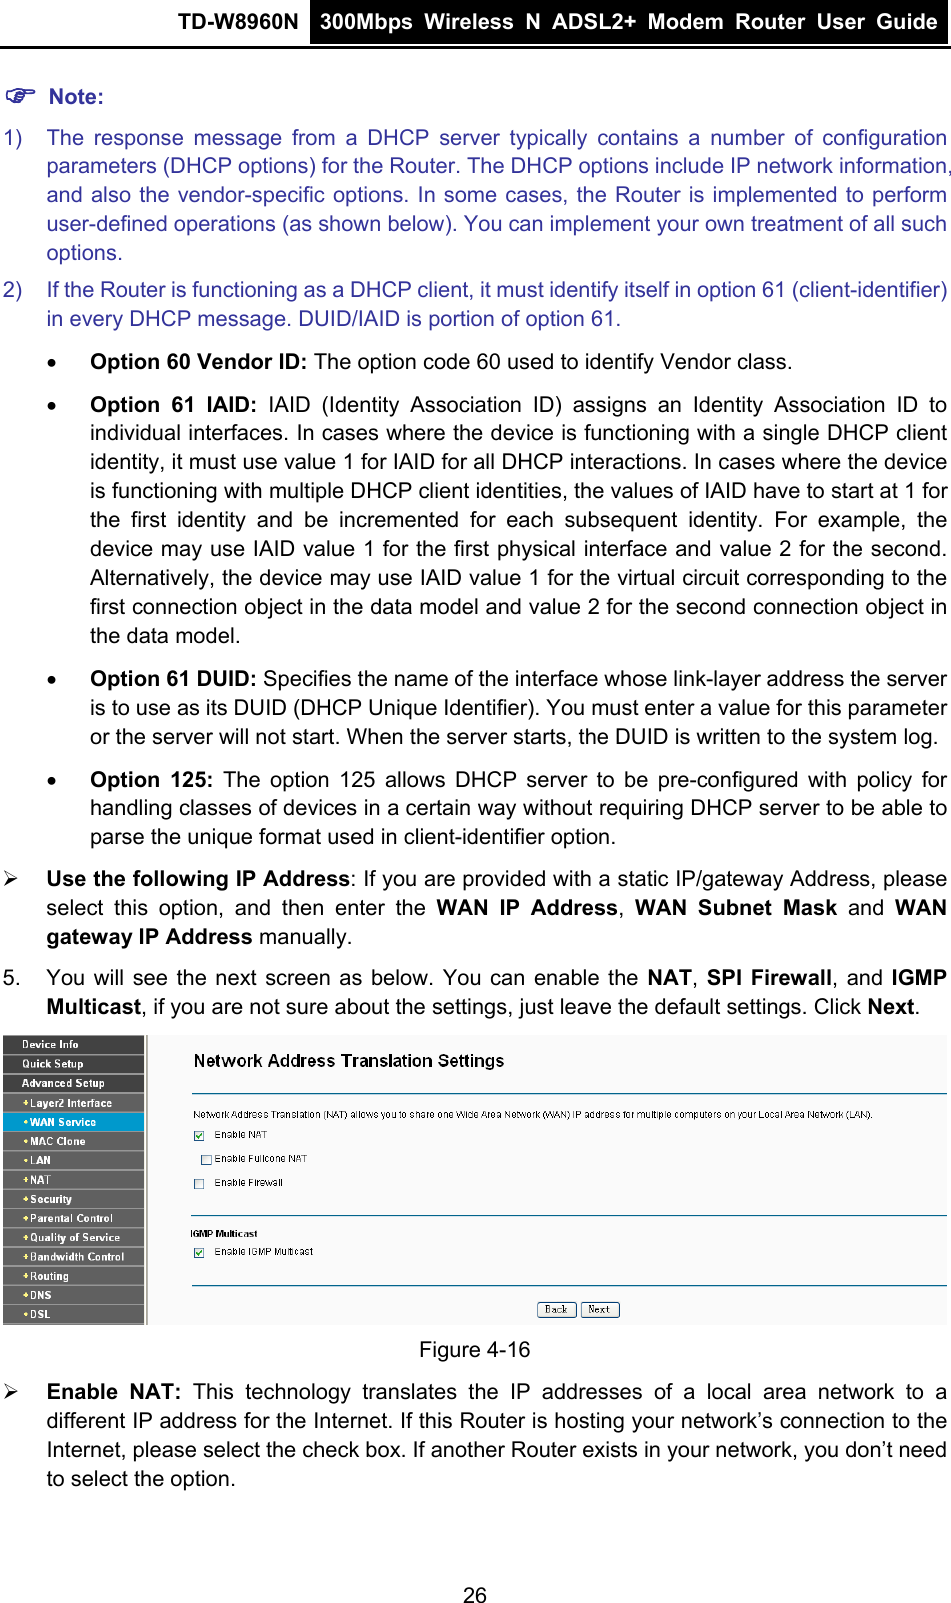 TD-W8960N  300Mbps Wireless N ADSL2+ Modem Router User Guide   Note: 1)  The response message from a DHCP server typically contains a number of configuration parameters (DHCP options) for the Router. The DHCP options include IP network information, and also the vendor-specific options. In some cases, the Router is implemented to perform user-defined operations (as shown below). You can implement your own treatment of all such options. 2)  If the Router is functioning as a DHCP client, it must identify itself in option 61 (client-identifier) in every DHCP message. DUID/IAID is portion of option 61.  Option 60 Vendor ID: The option code 60 used to identify Vendor class.  Option 61 IAID: IAID (Identity Association ID) assigns an Identity Association ID to individual interfaces. In cases where the device is functioning with a single DHCP client identity, it must use value 1 for IAID for all DHCP interactions. In cases where the device is functioning with multiple DHCP client identities, the values of IAID have to start at 1 for the first identity and be incremented for each subsequent identity. For example, the device may use IAID value 1 for the first physical interface and value 2 for the second. Alternatively, the device may use IAID value 1 for the virtual circuit corresponding to the first connection object in the data model and value 2 for the second connection object in the data model.  Option 61 DUID: Specifies the name of the interface whose link-layer address the server is to use as its DUID (DHCP Unique Identifier). You must enter a value for this parameter or the server will not start. When the server starts, the DUID is written to the system log.  Option 125: The option 125 allows DHCP server to be pre-configured with policy for handling classes of devices in a certain way without requiring DHCP server to be able to parse the unique format used in client-identifier option.    Use the following IP Address: If you are provided with a static IP/gateway Address, please select this option, and then enter the WAN IP Address,  WAN Subnet Mask and WAN gateway IP Address manually. 5.  You will see the next screen as below. You can enable the NAT, SPI Firewall, and IGMP Multicast, if you are not sure about the settings, just leave the default settings. Click Next.  Figure 4-16  Enable NAT: This technology translates the IP addresses of a local area network to a different IP address for the Internet. If this Router is hosting your network’s connection to the Internet, please select the check box. If another Router exists in your network, you don’t need to select the option. 26 